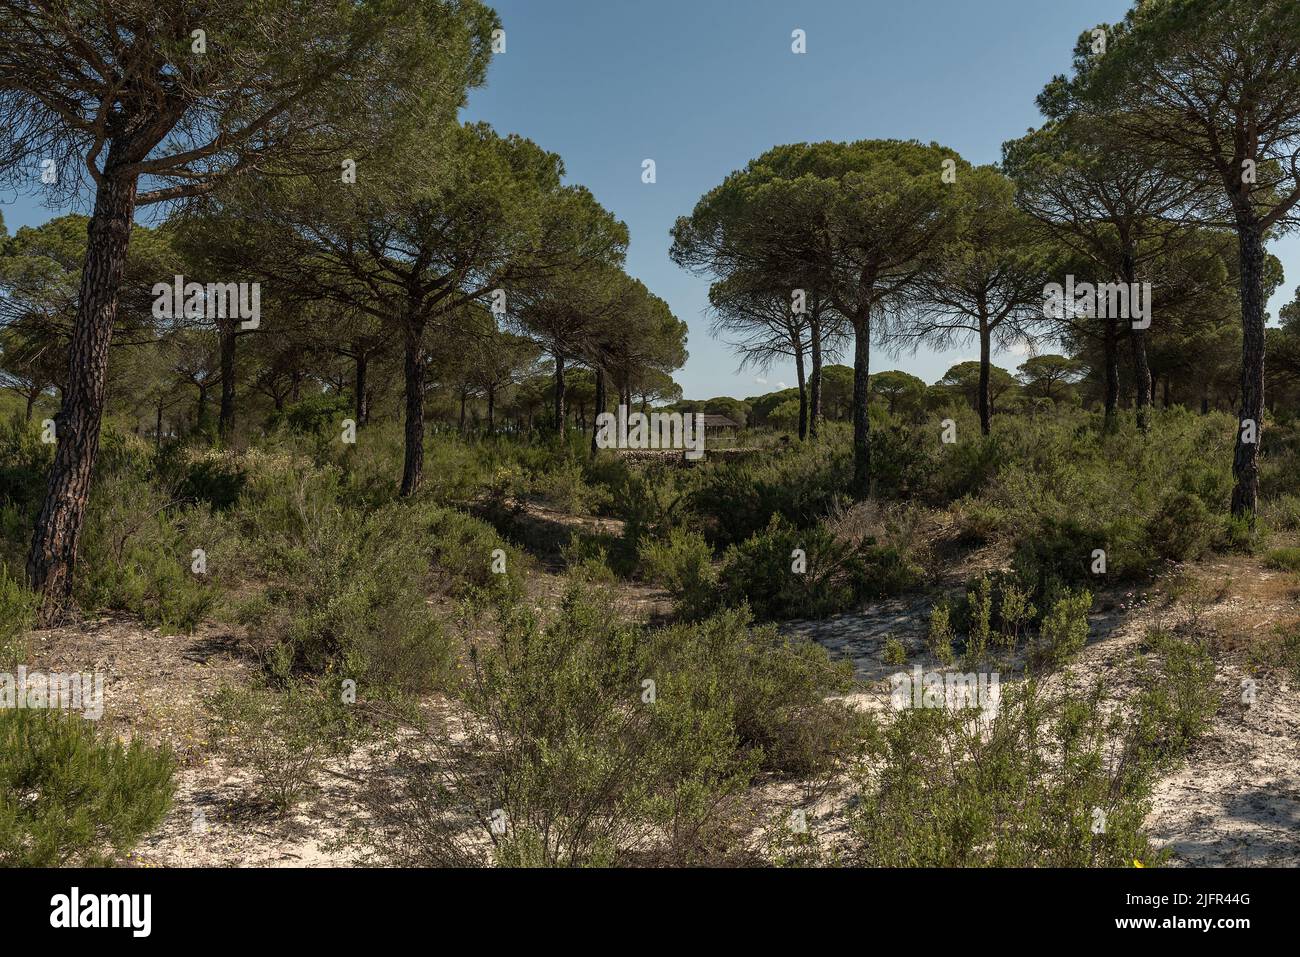 Landscape of Donana National Park in Andalusia, Spain Stock Photo